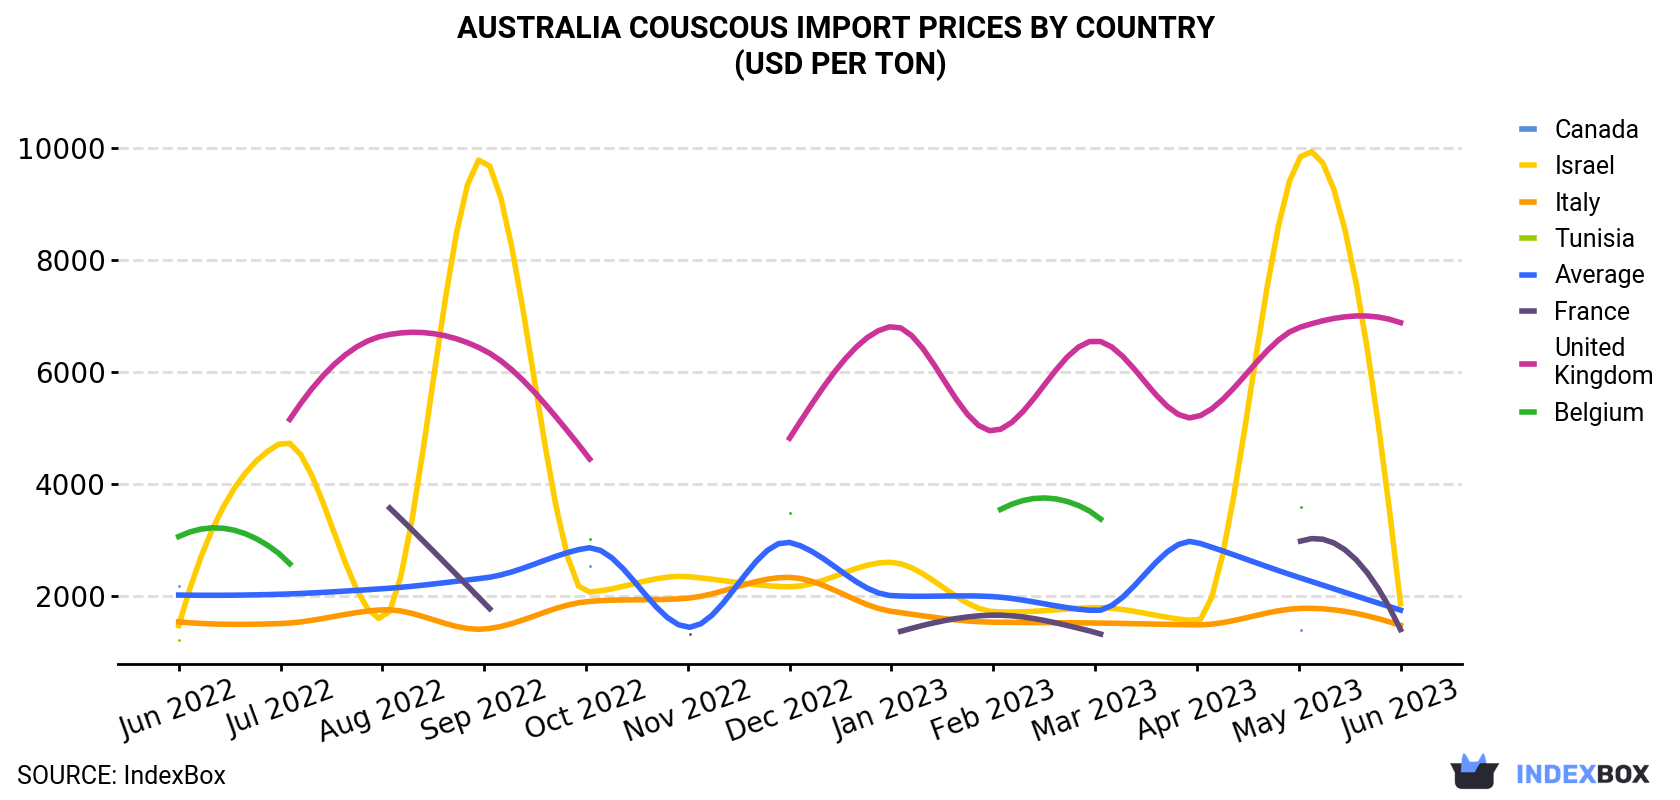 Australia Couscous Import Prices By Country (USD Per Ton)